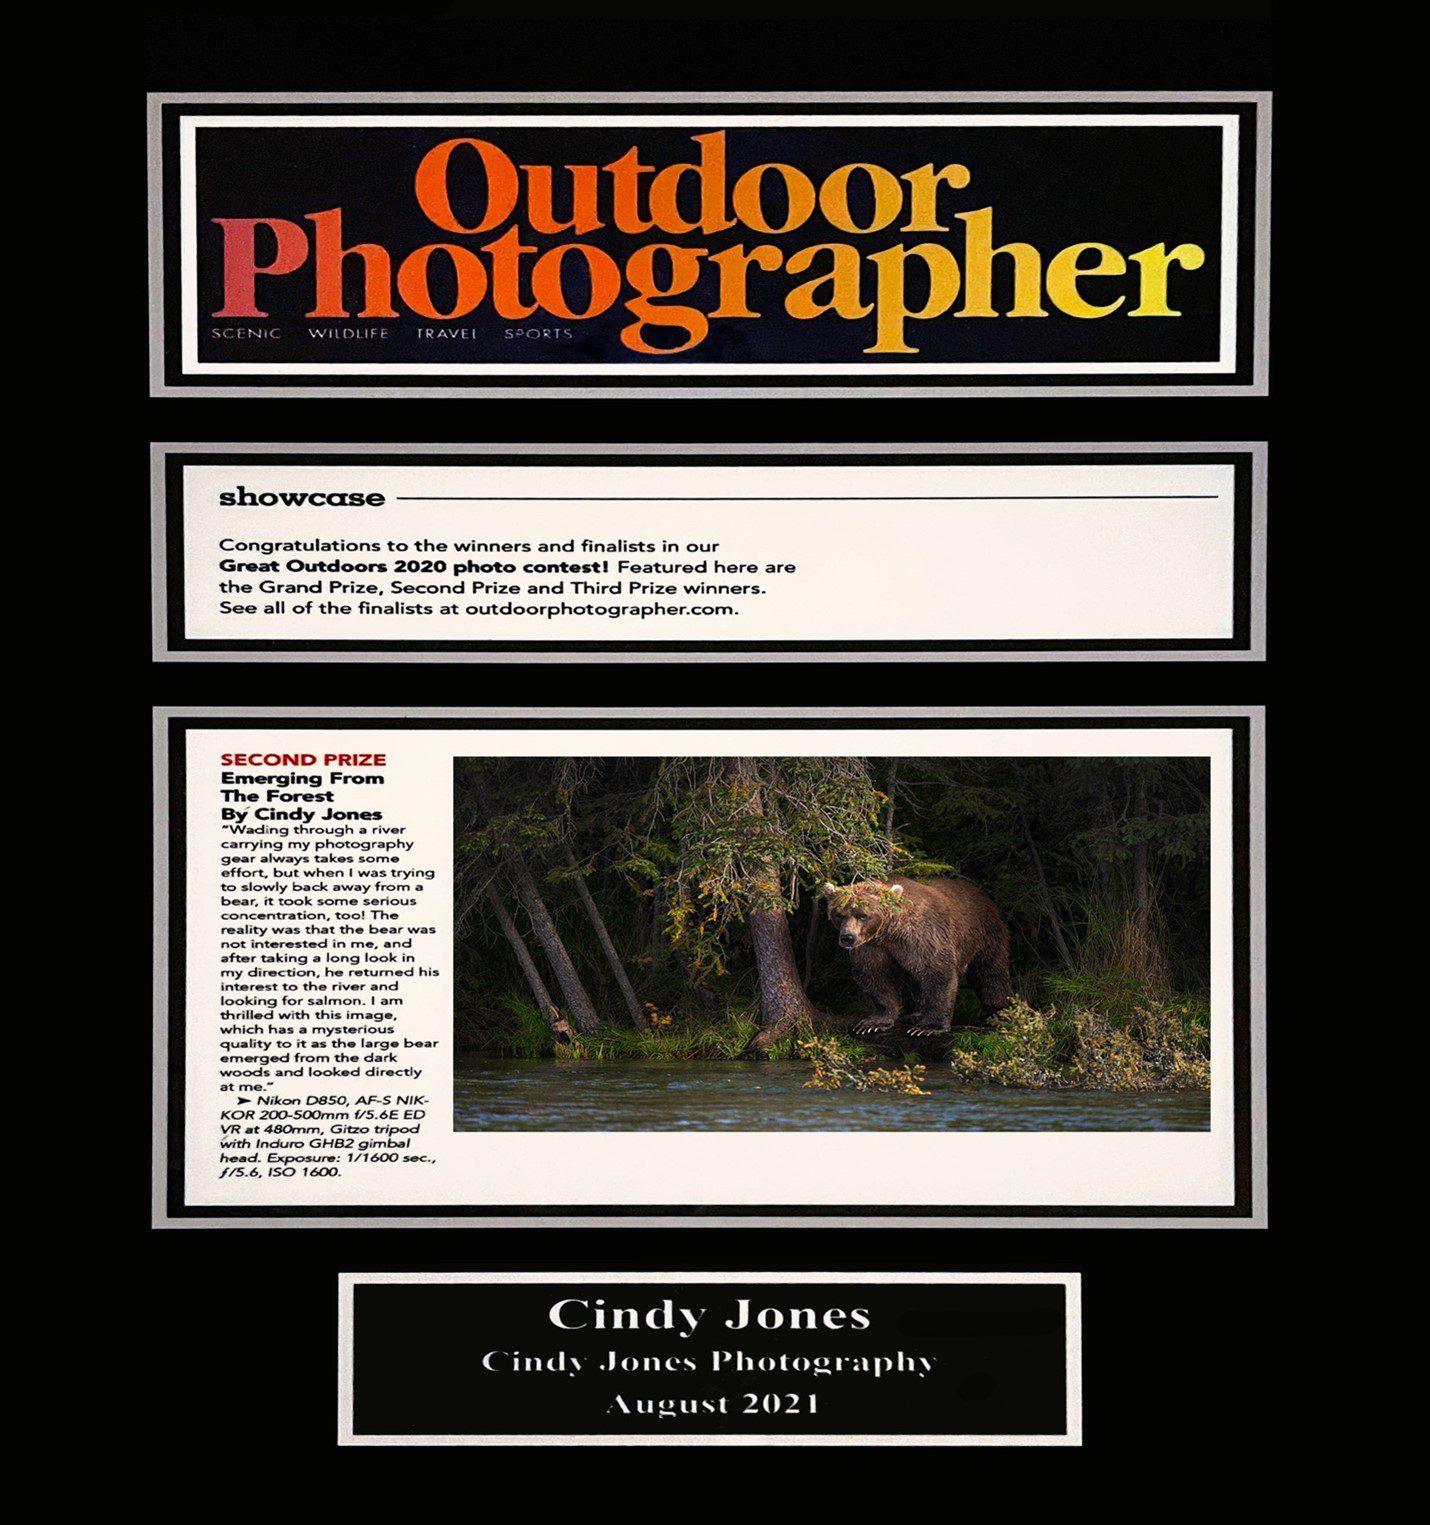 The cover of the outdoor photographer magazine.